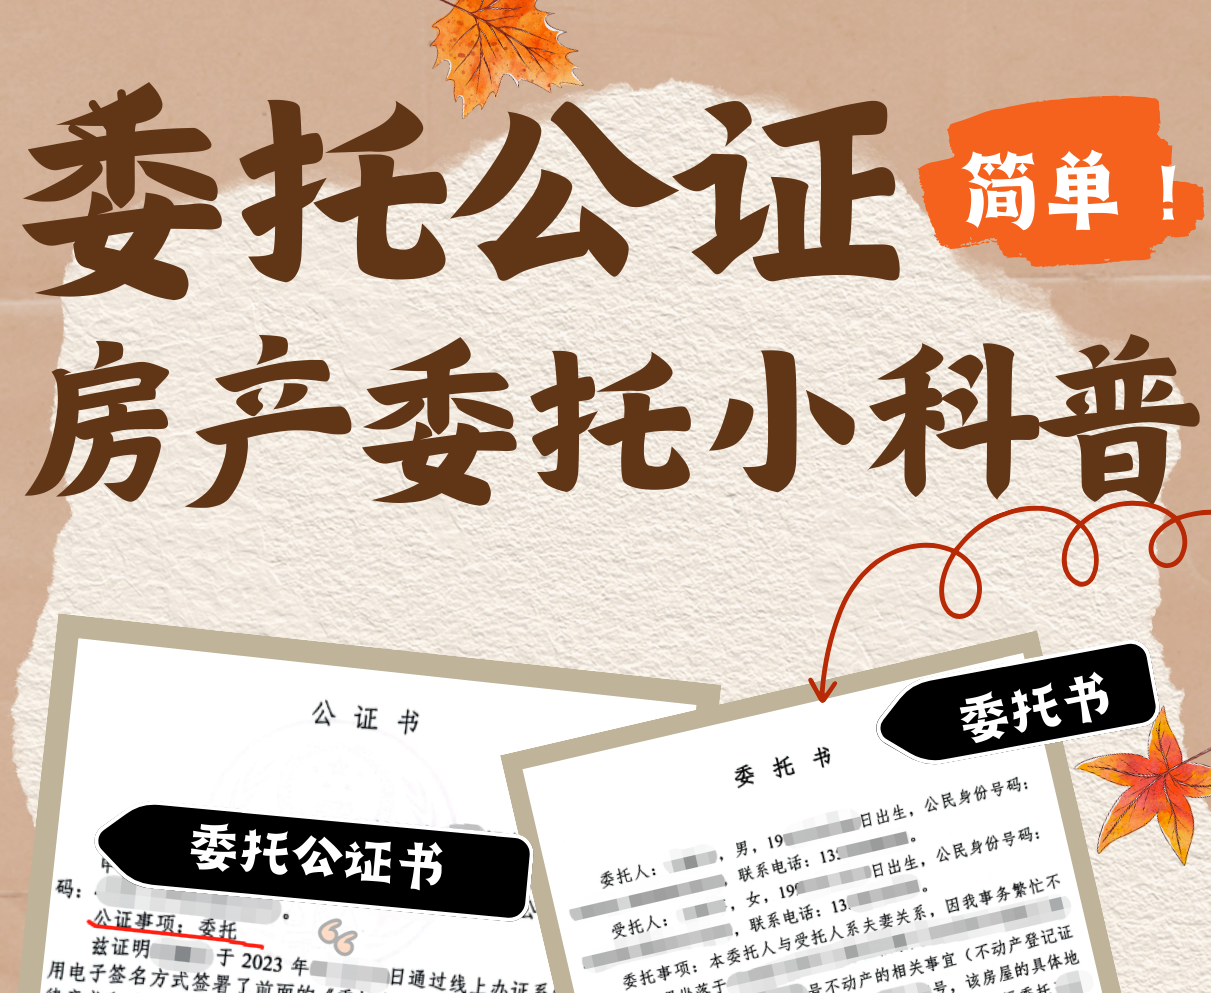 Read more about the article 委托公证案例：房产委托公证小科普